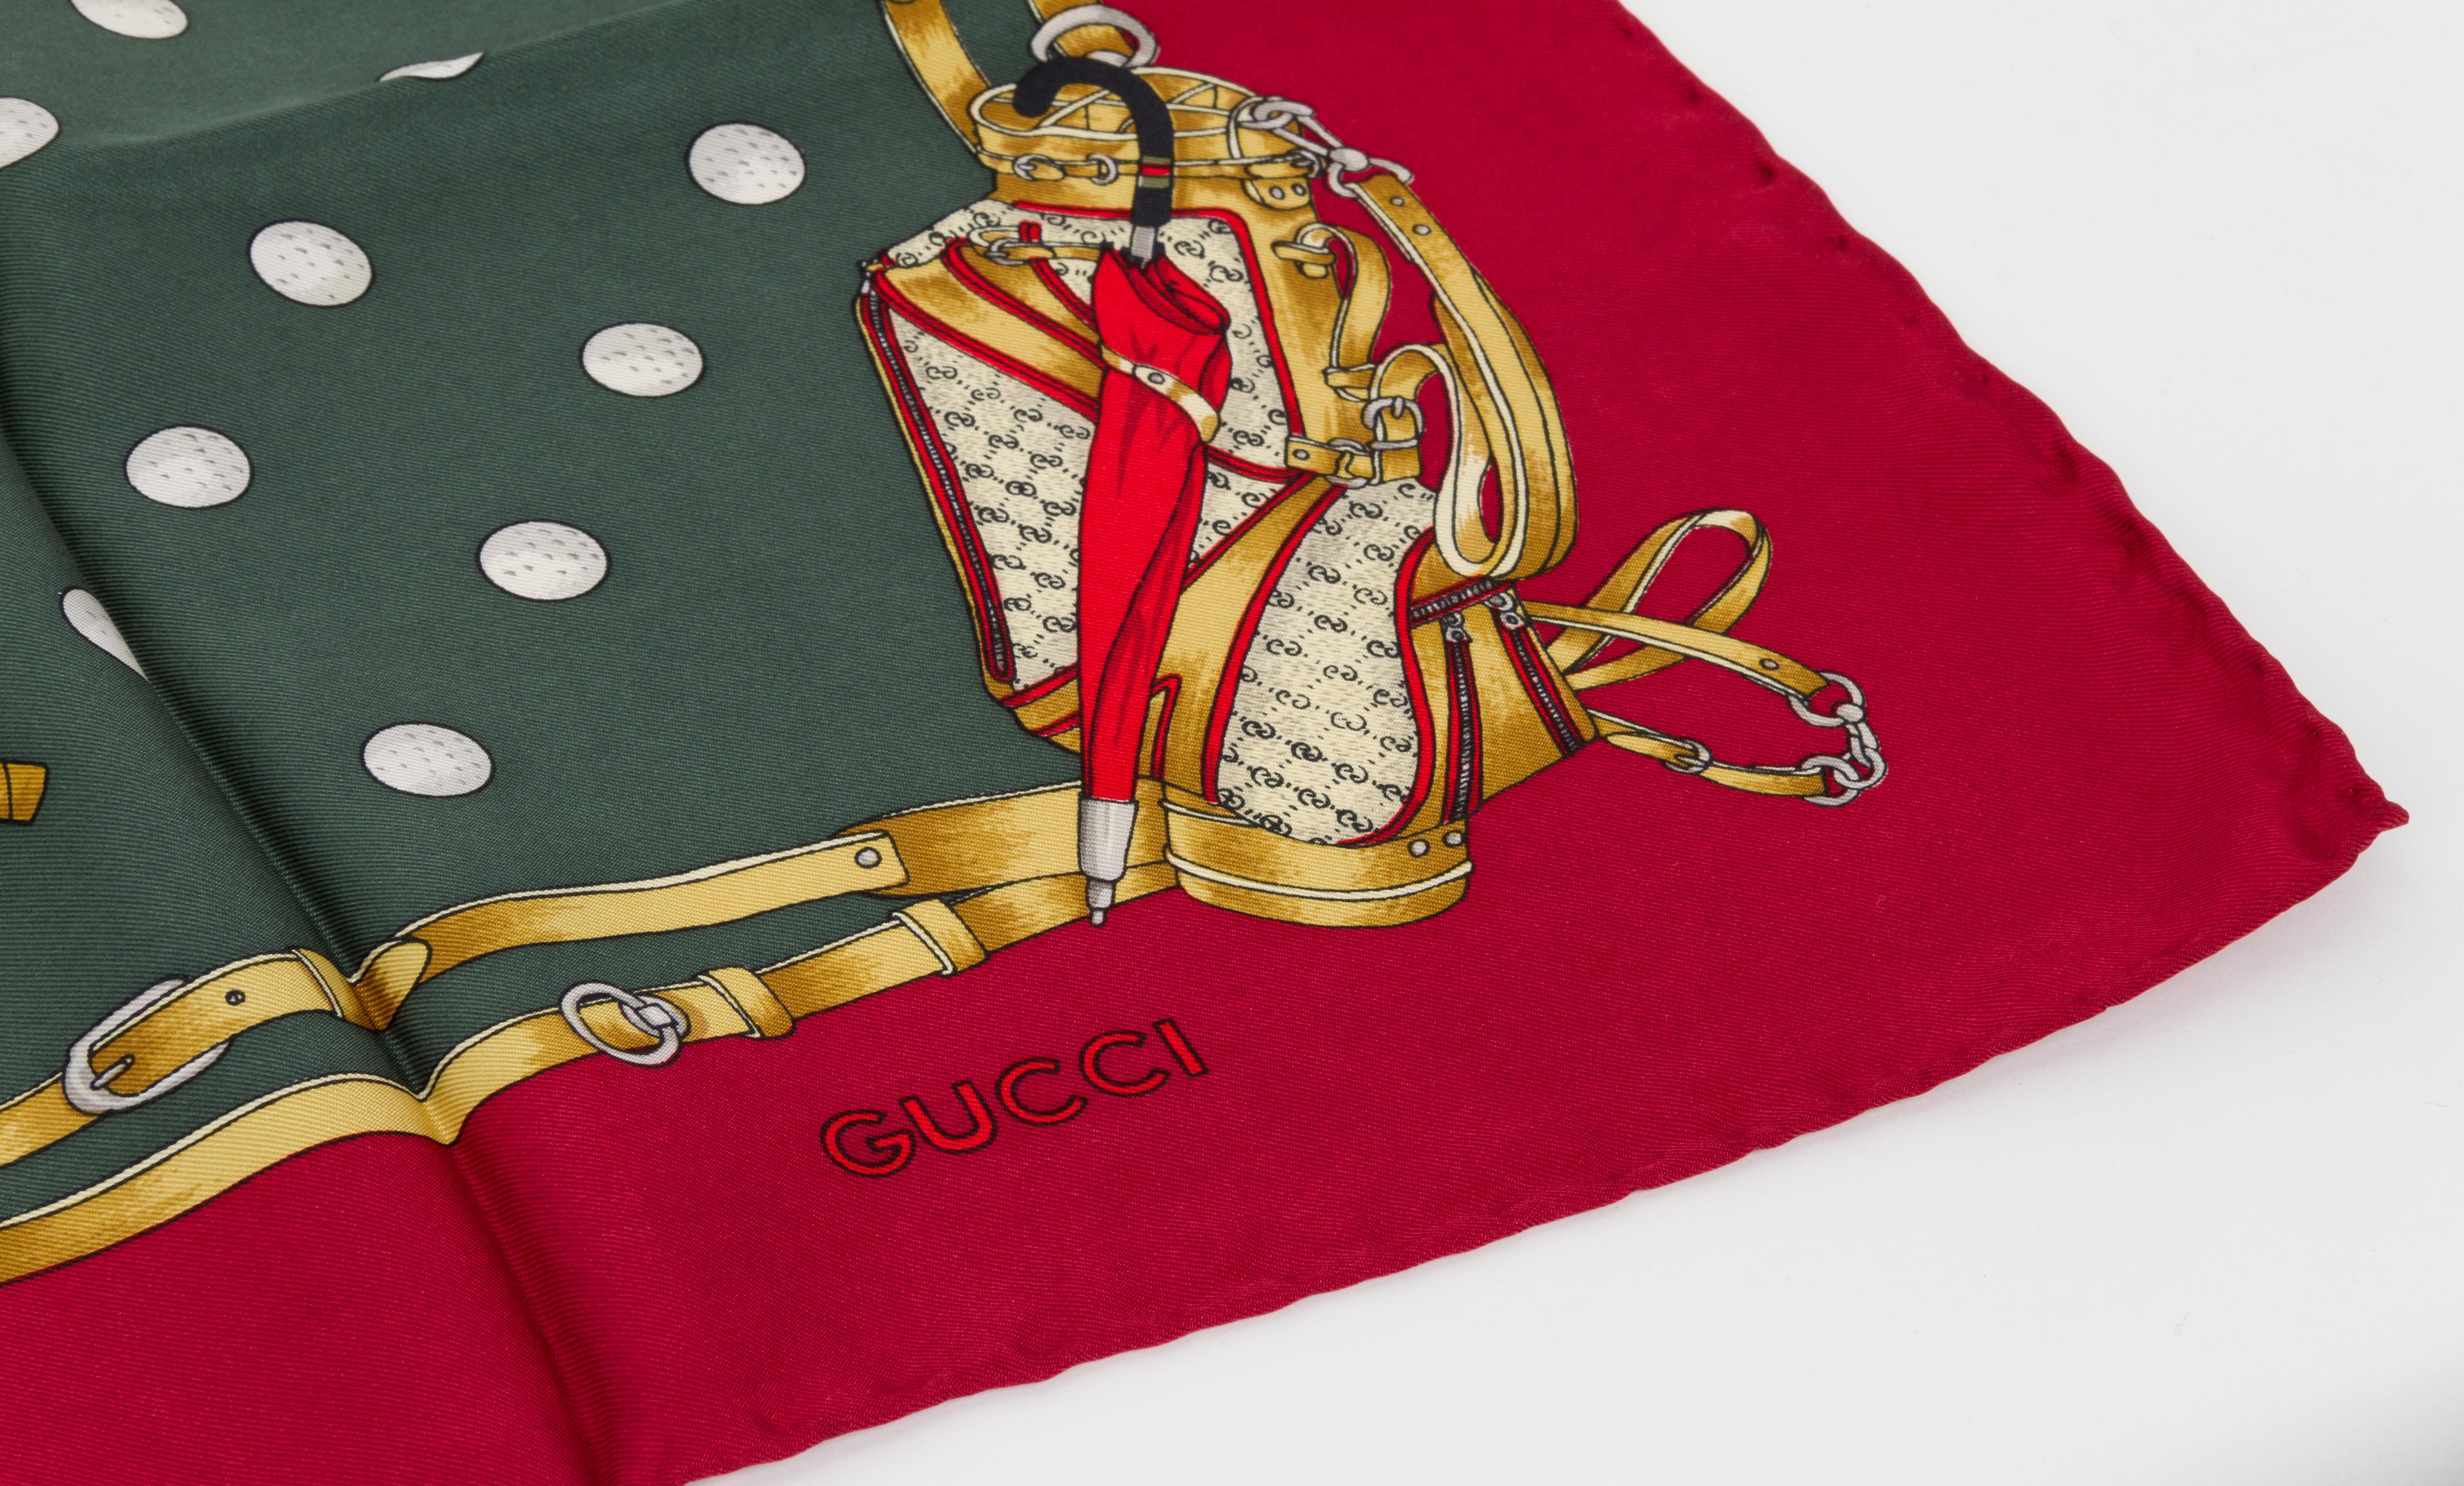 Gucci red and green gold themed silk twill scarf. Hand rolled edges.
